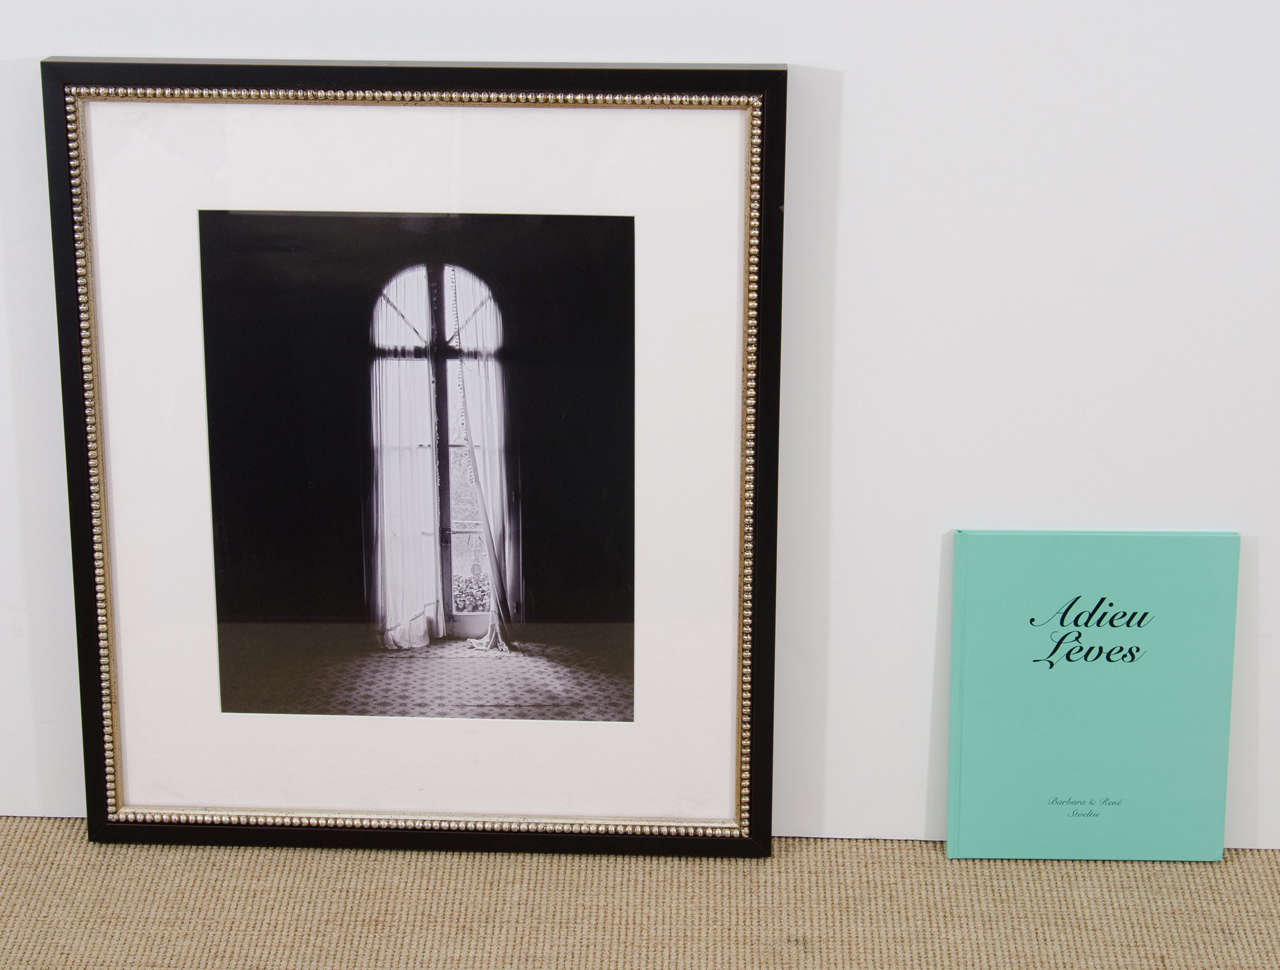 'Adieu Leves' Madeleine Castaing's home, Barbara and Rene Stoeltie, framed photograph from the exhibition 'Adieu Lèves' Galerie Mortier–Valat, Paris, 2006. Limited edition.